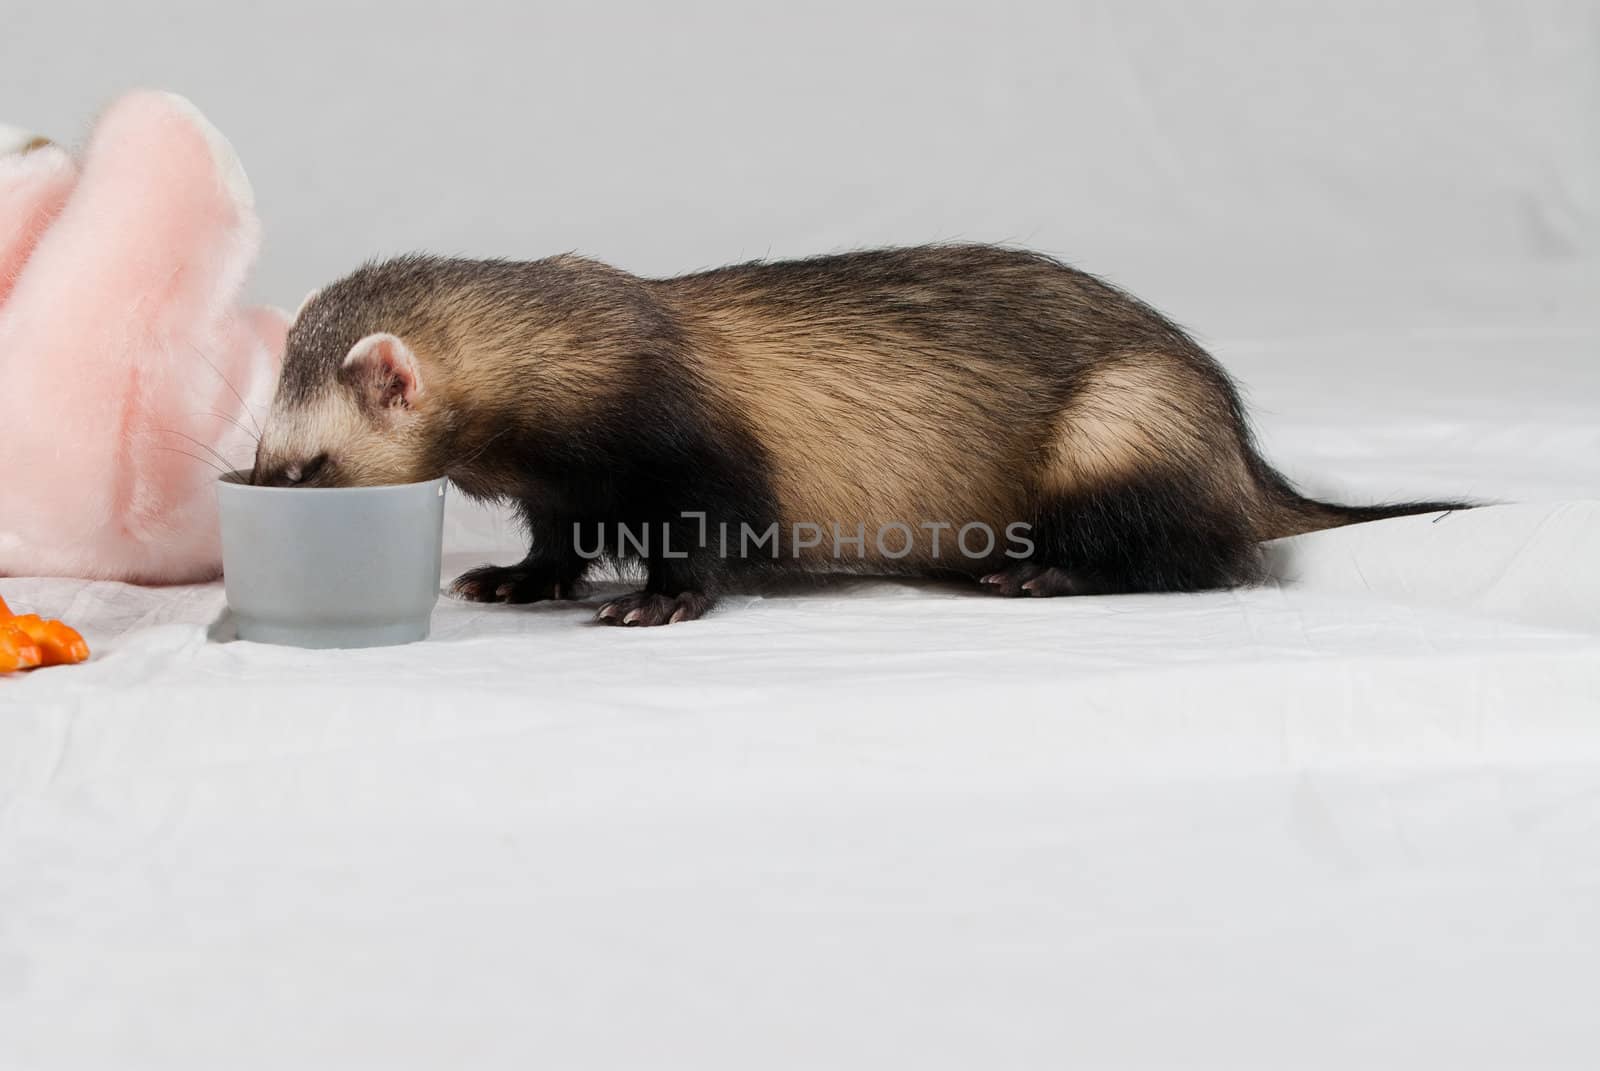 Polecat shoot made in studio on white background